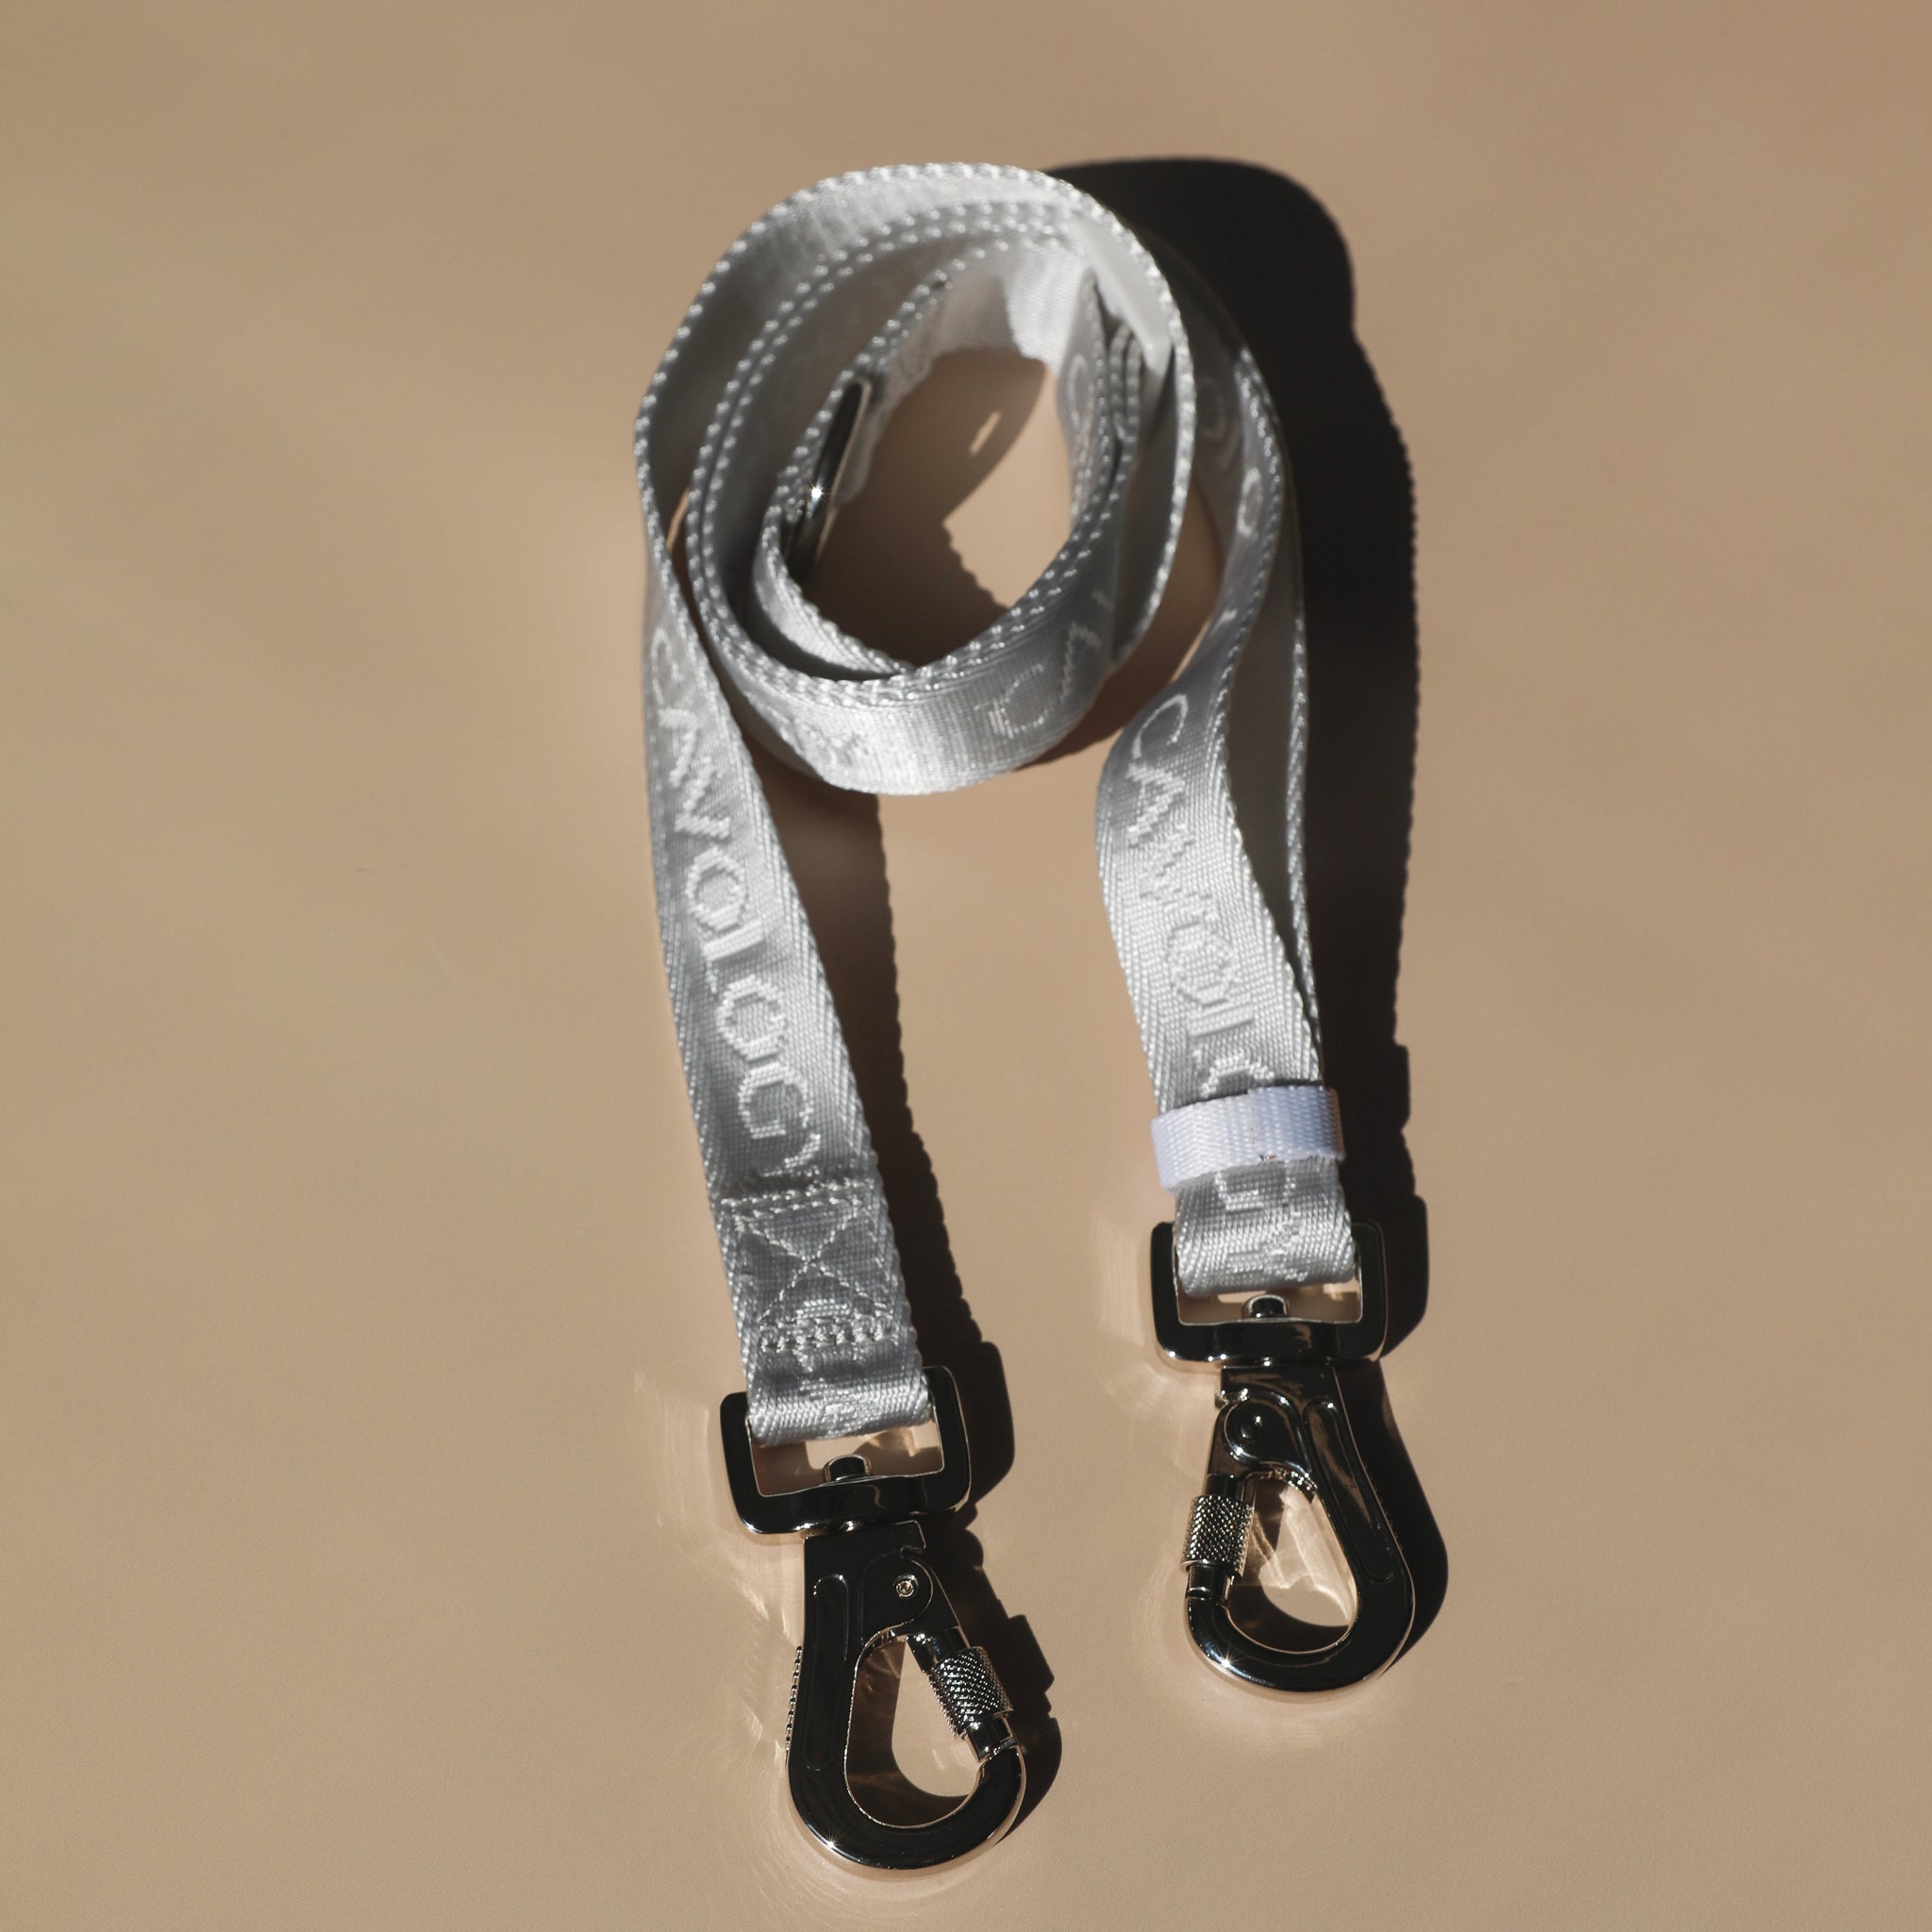 LEASH ATTACHMENT FOR HANDS FREE LEASH GREY